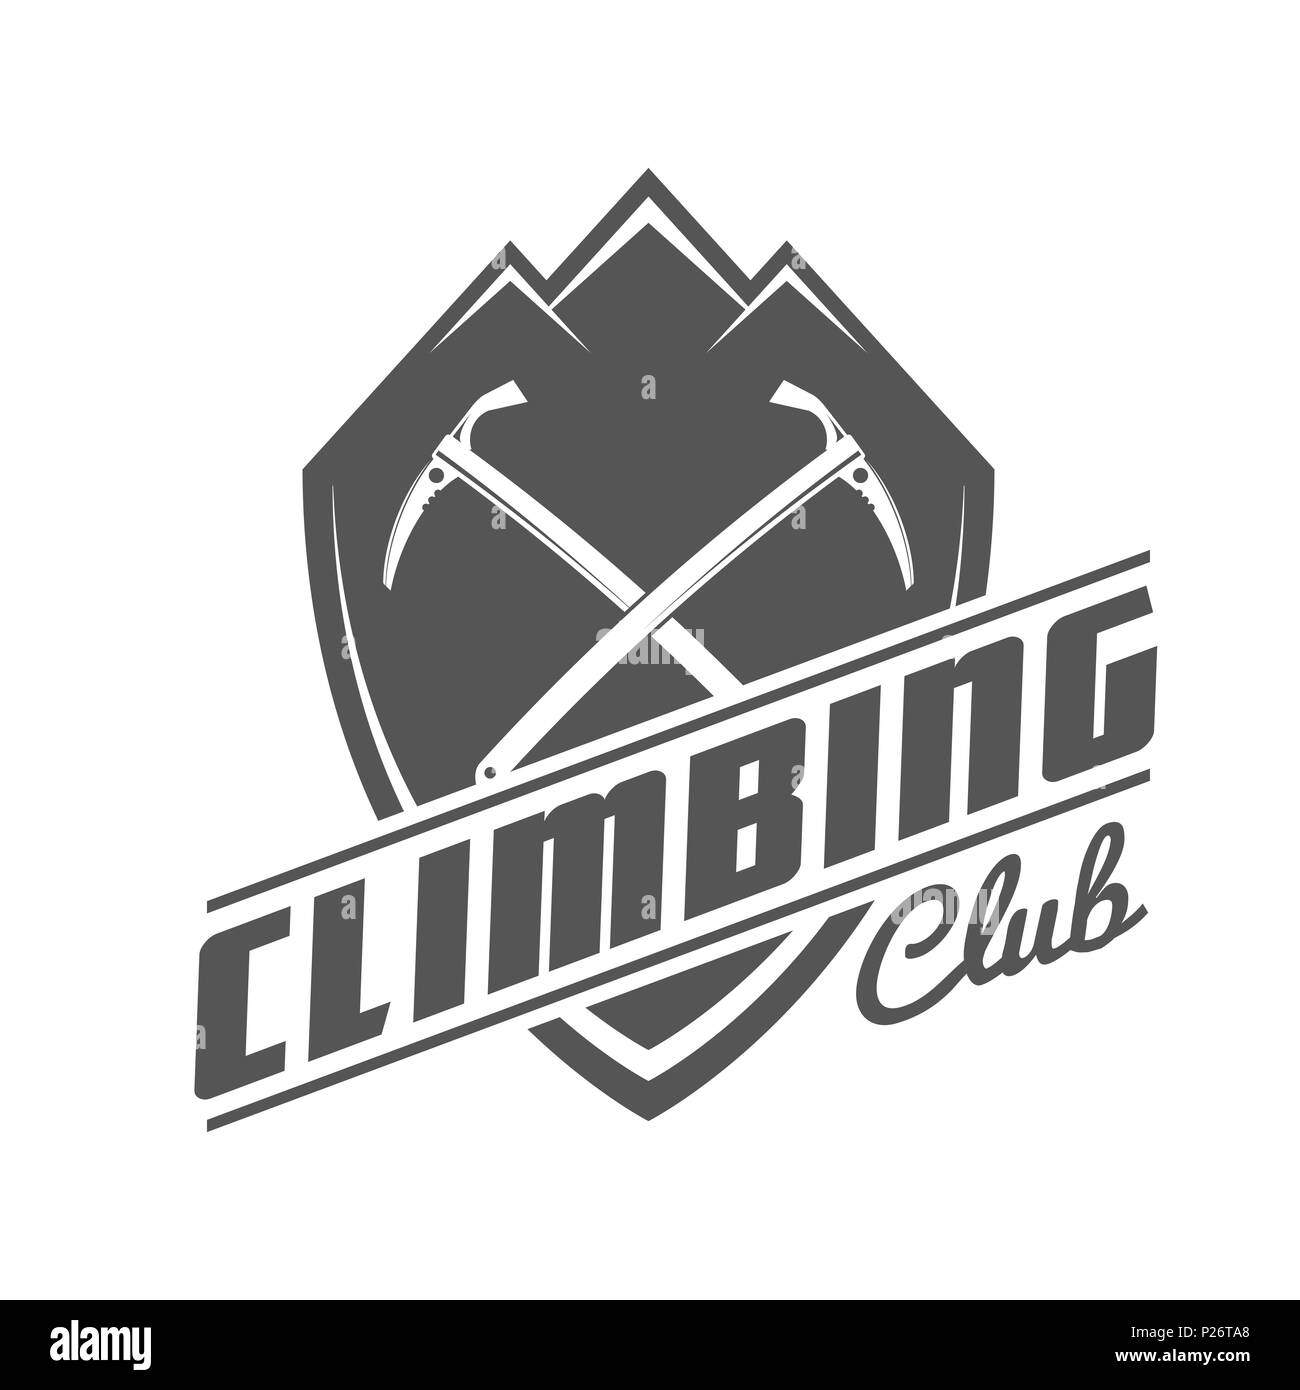 Climbing Club Black and White Emblem. Concept for Shirt or Label, Stamp or Tee. Stock Photo